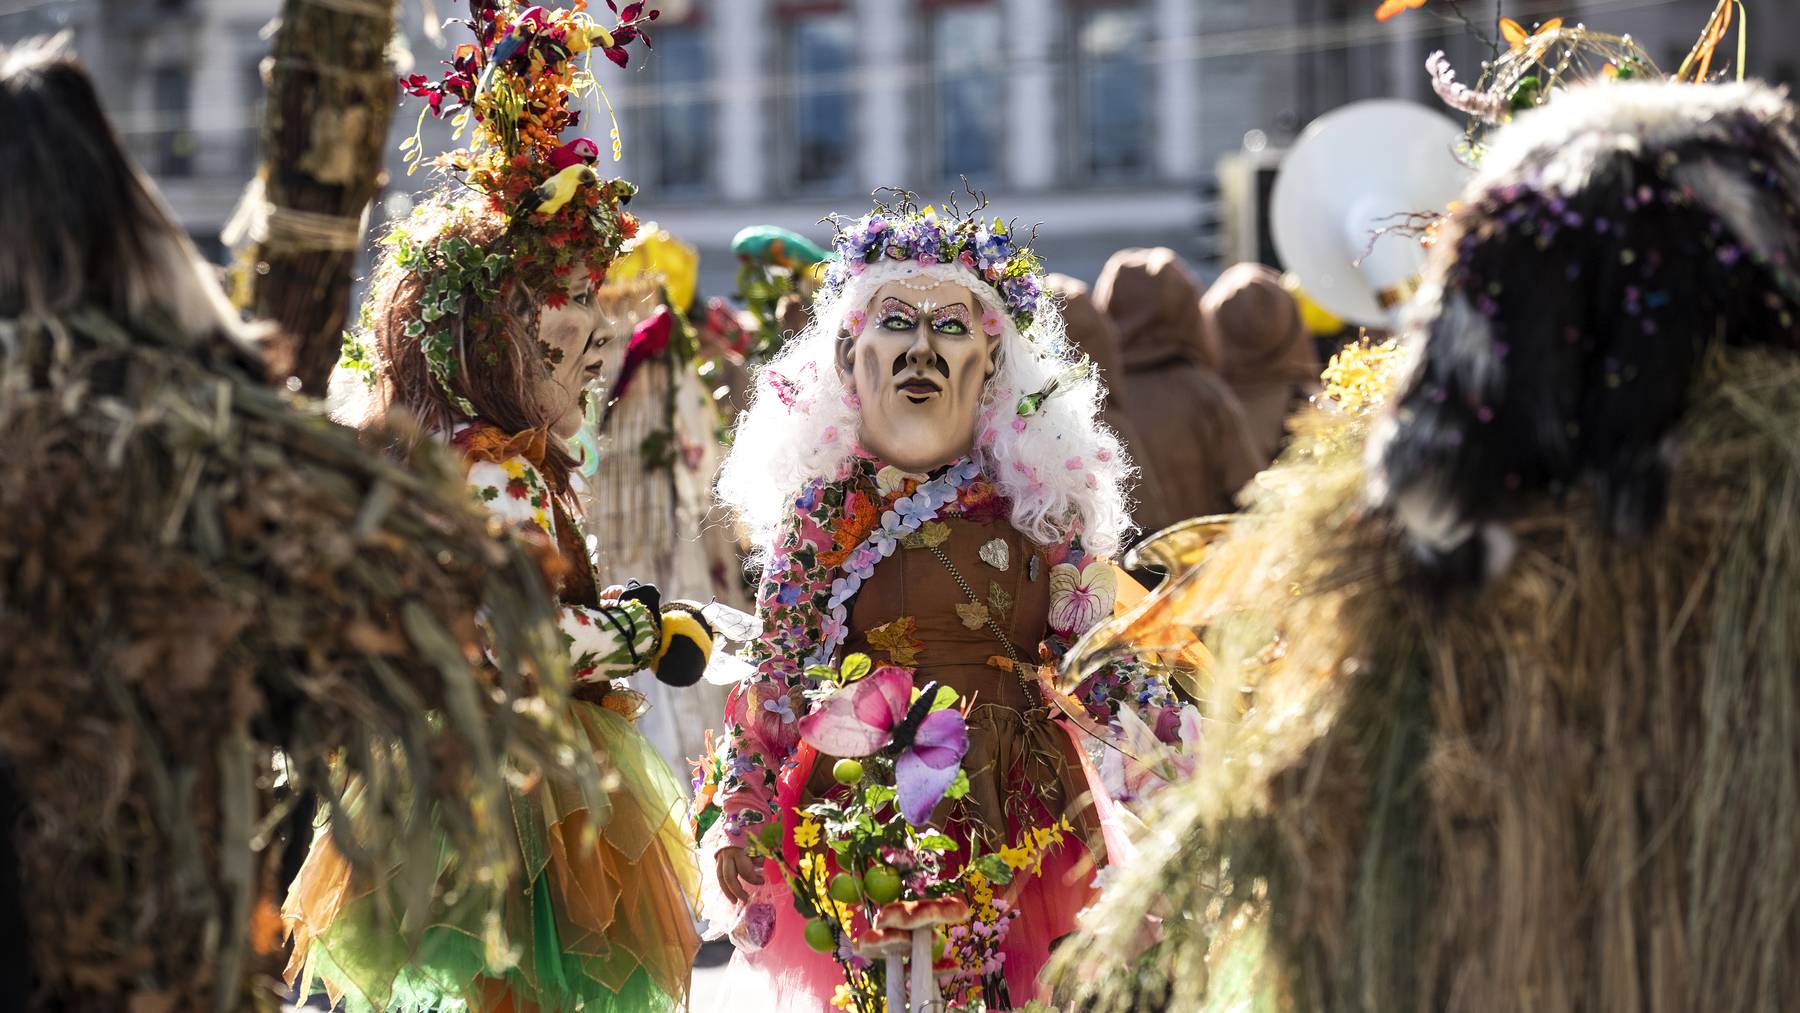 Masked revellers parade through the streets during the carnival season in Lucerne, Switzerland, Thursday, 20 February 2020. The carnival takes place in Lucerne from 20 to 25 February 2020.